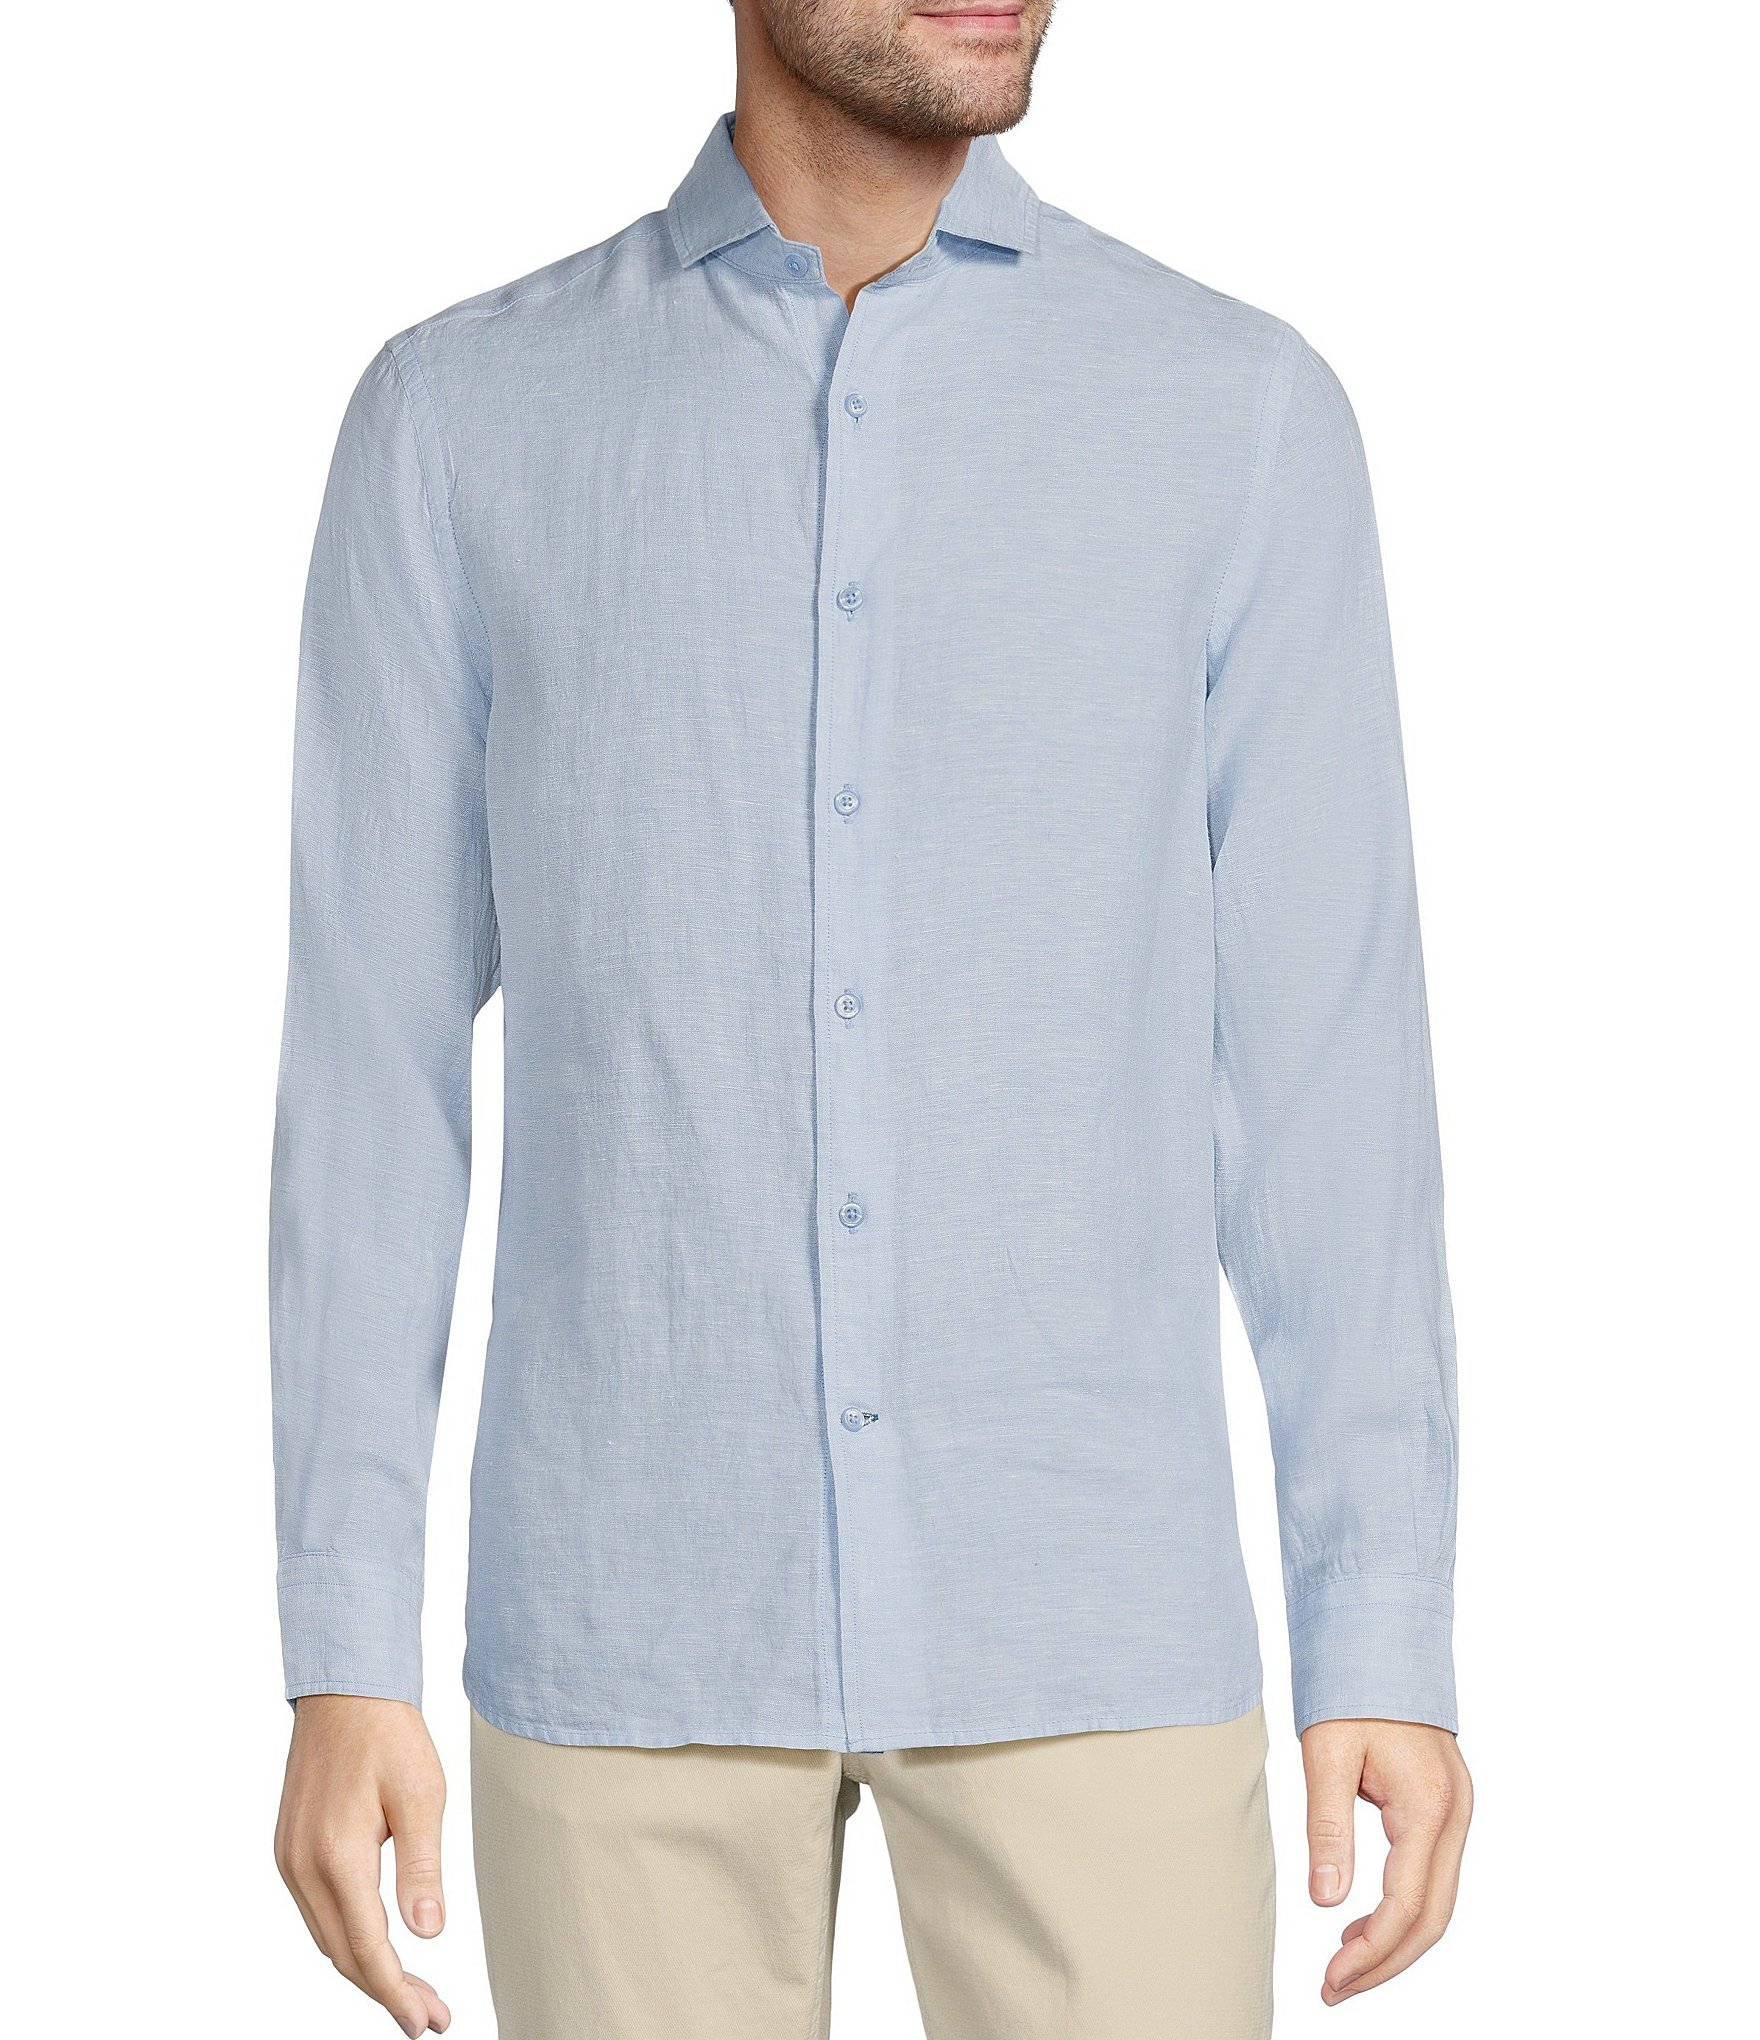 Cremieux Blue Label French Linen Collection Slim Fit Long Sleeve Woven ...